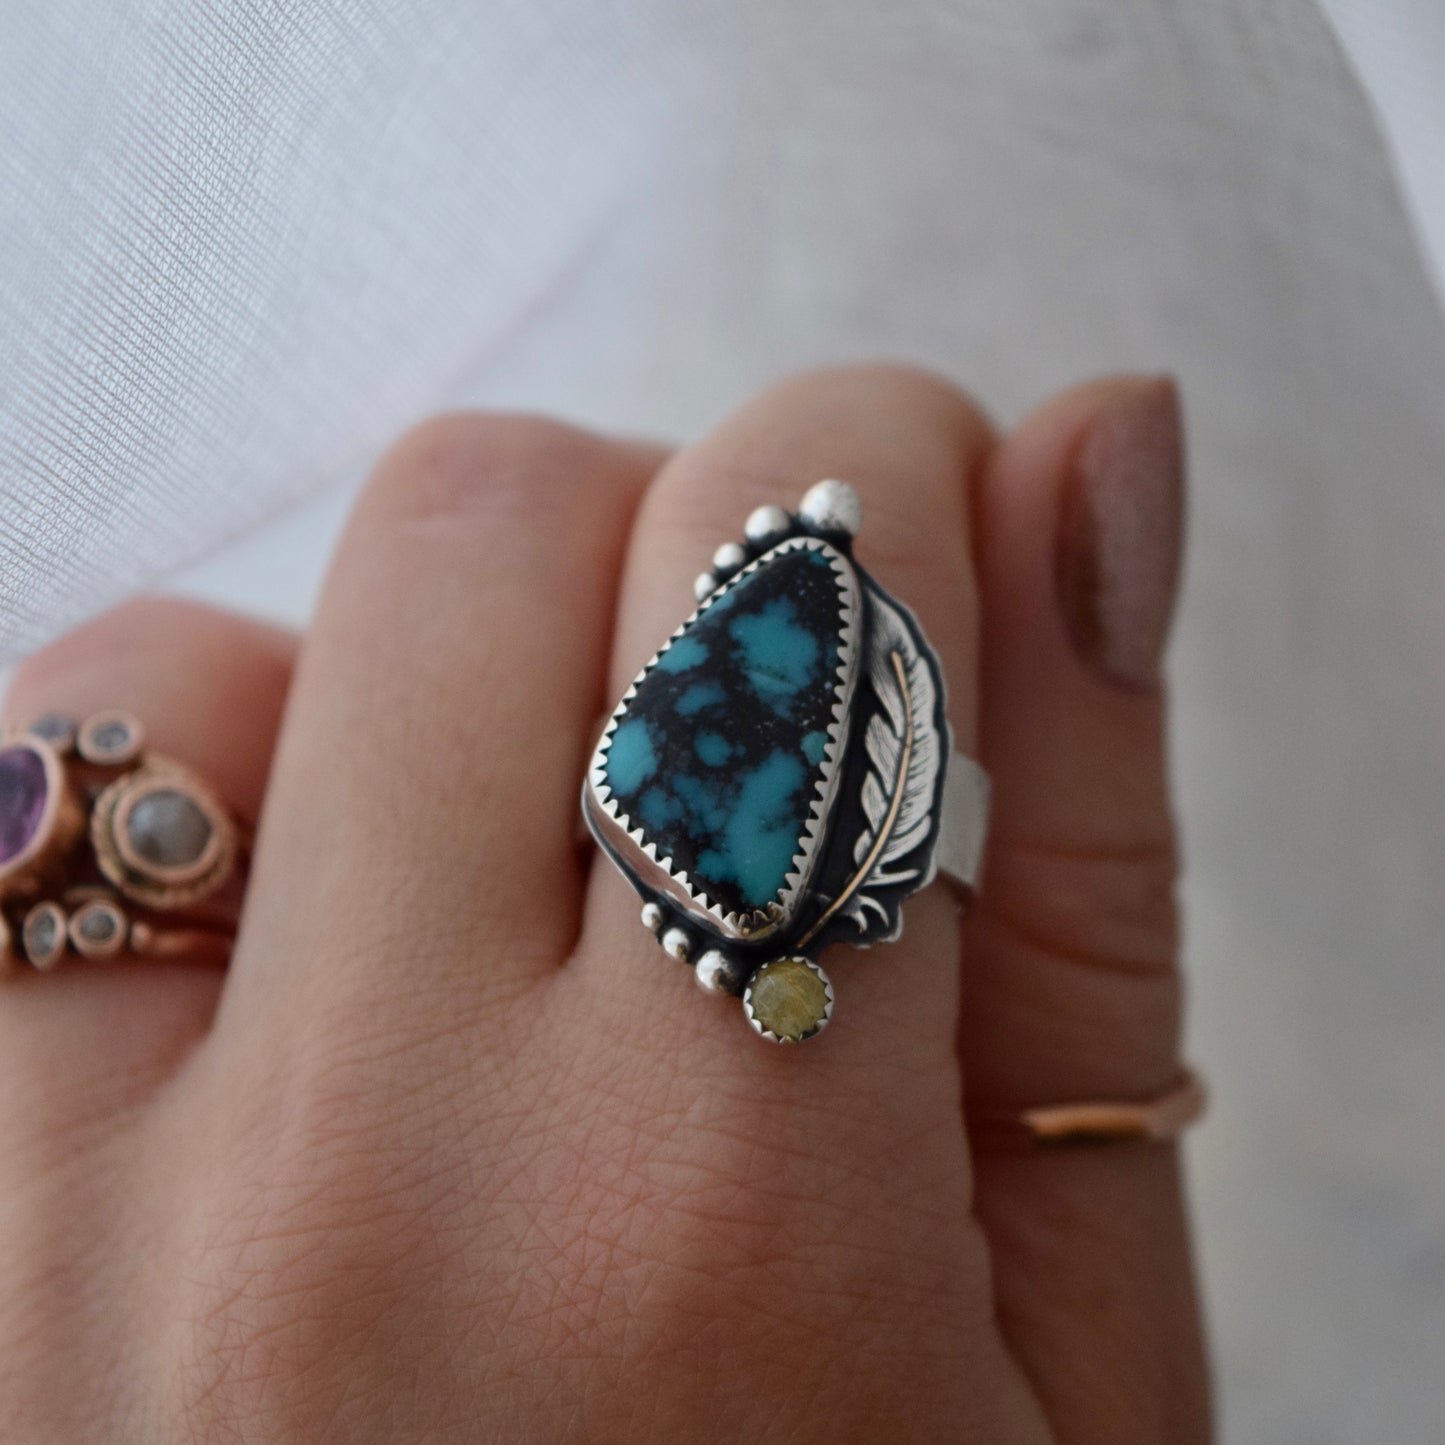 Eagle Feather Ring with Hubai Turquoise, Golden Rutilated Quartz, and Gold Fill Fits Size 9/9.25